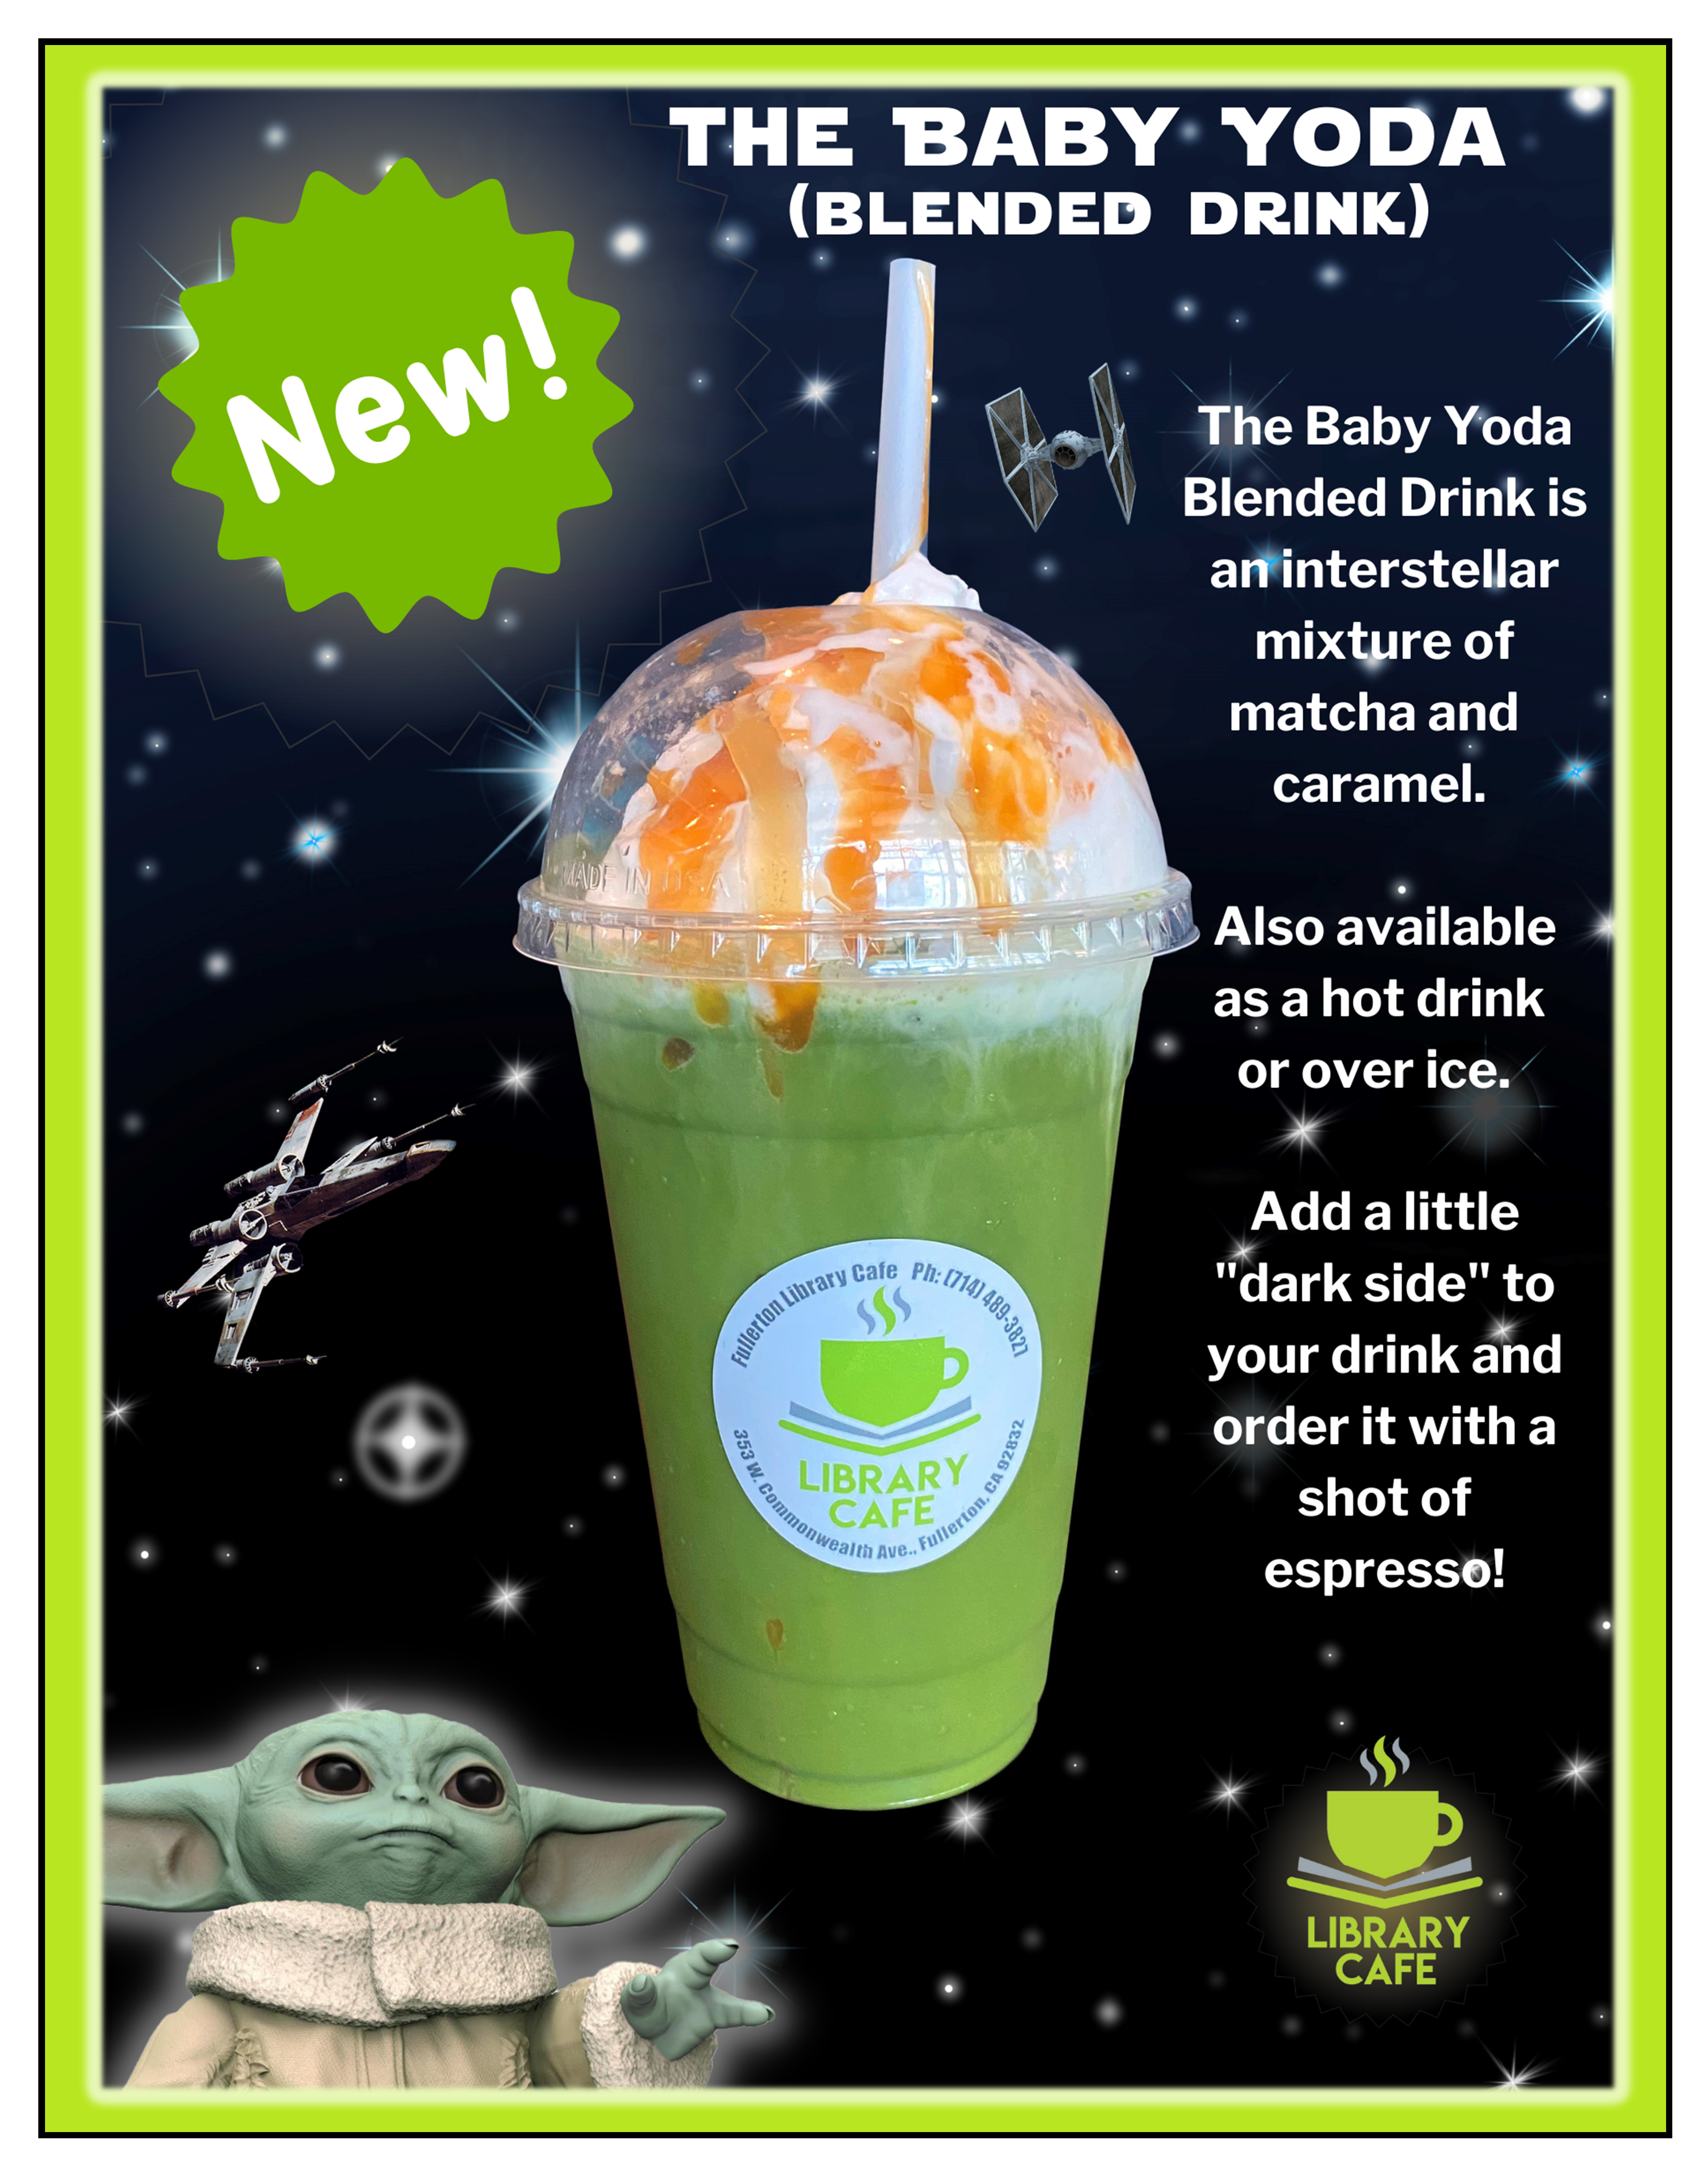 The Baby Yoda (a blended, iced, or hot drink) - now available